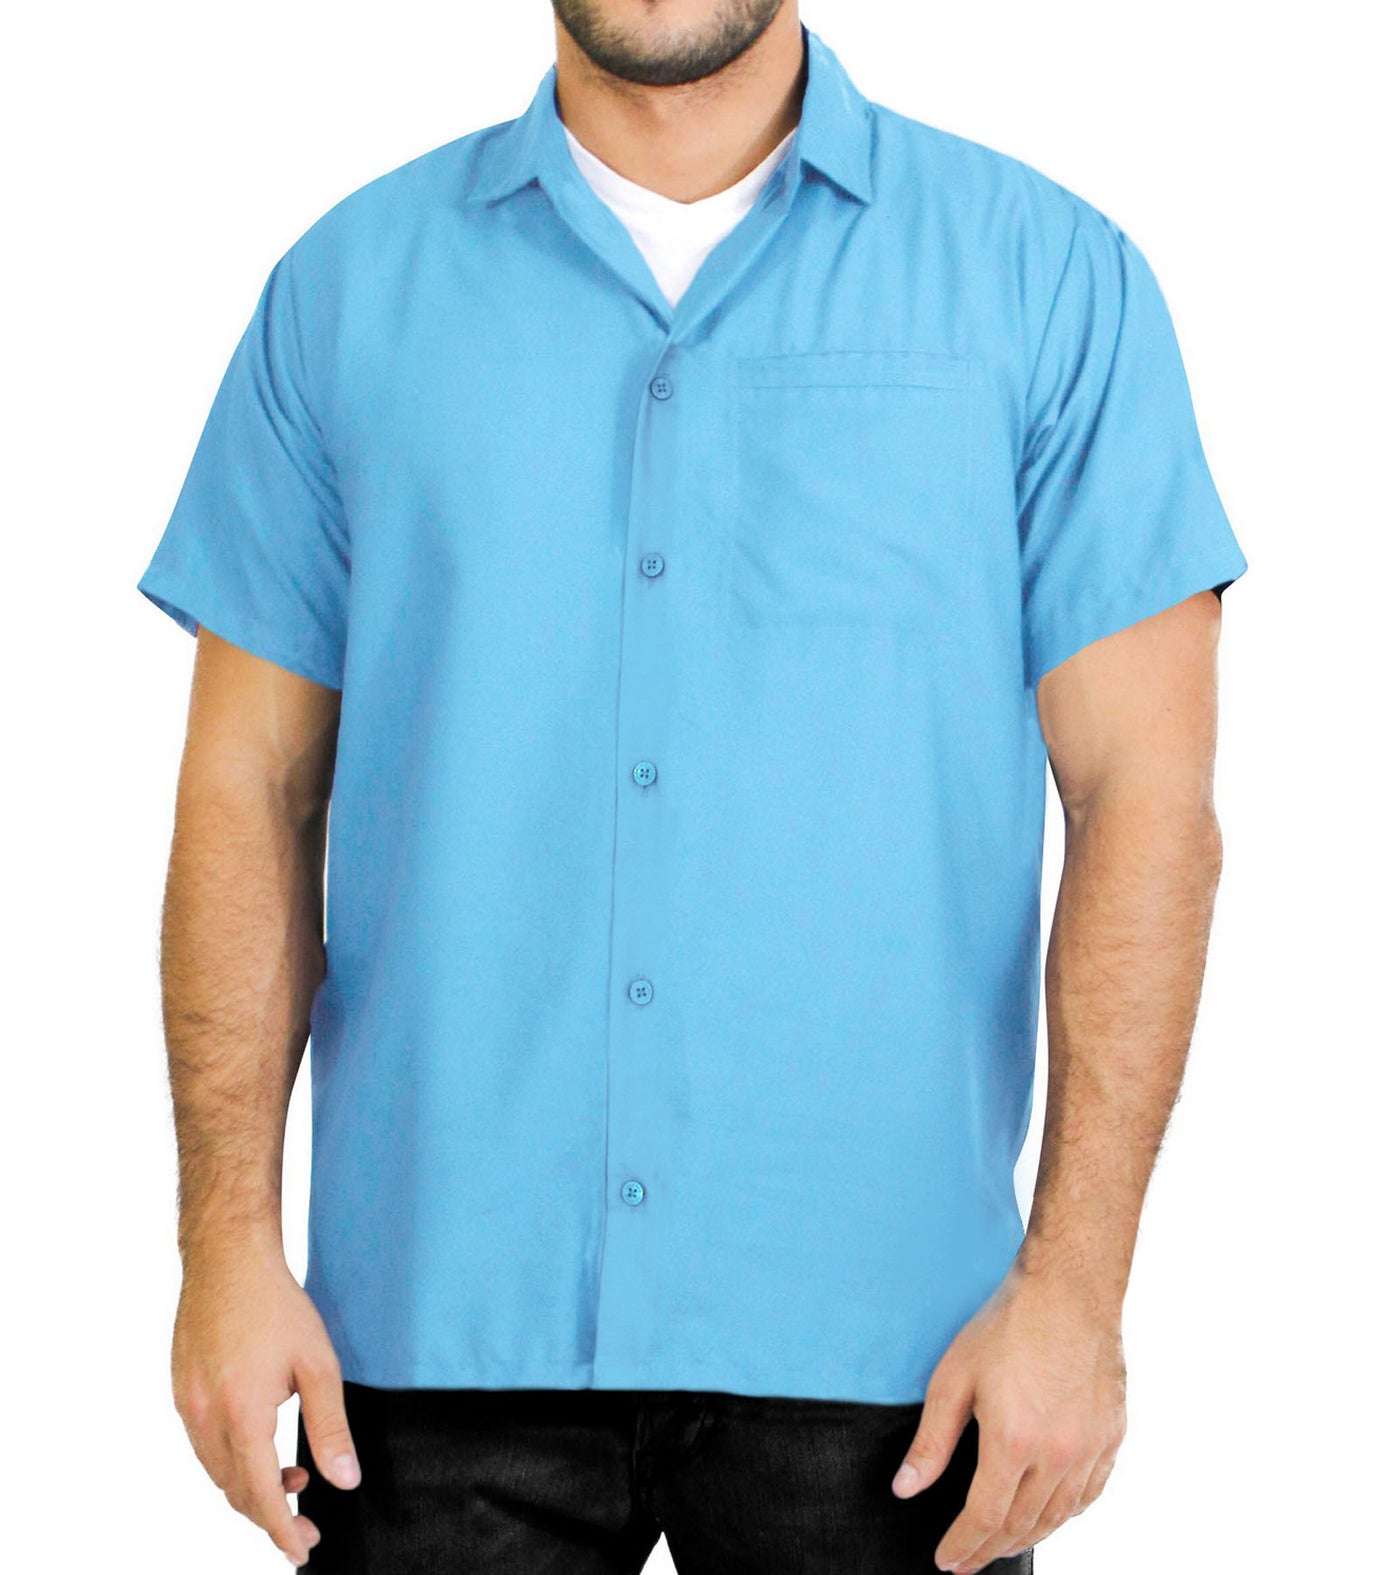 Skyblue Rayon Blend One pocket Casual Shirt for men